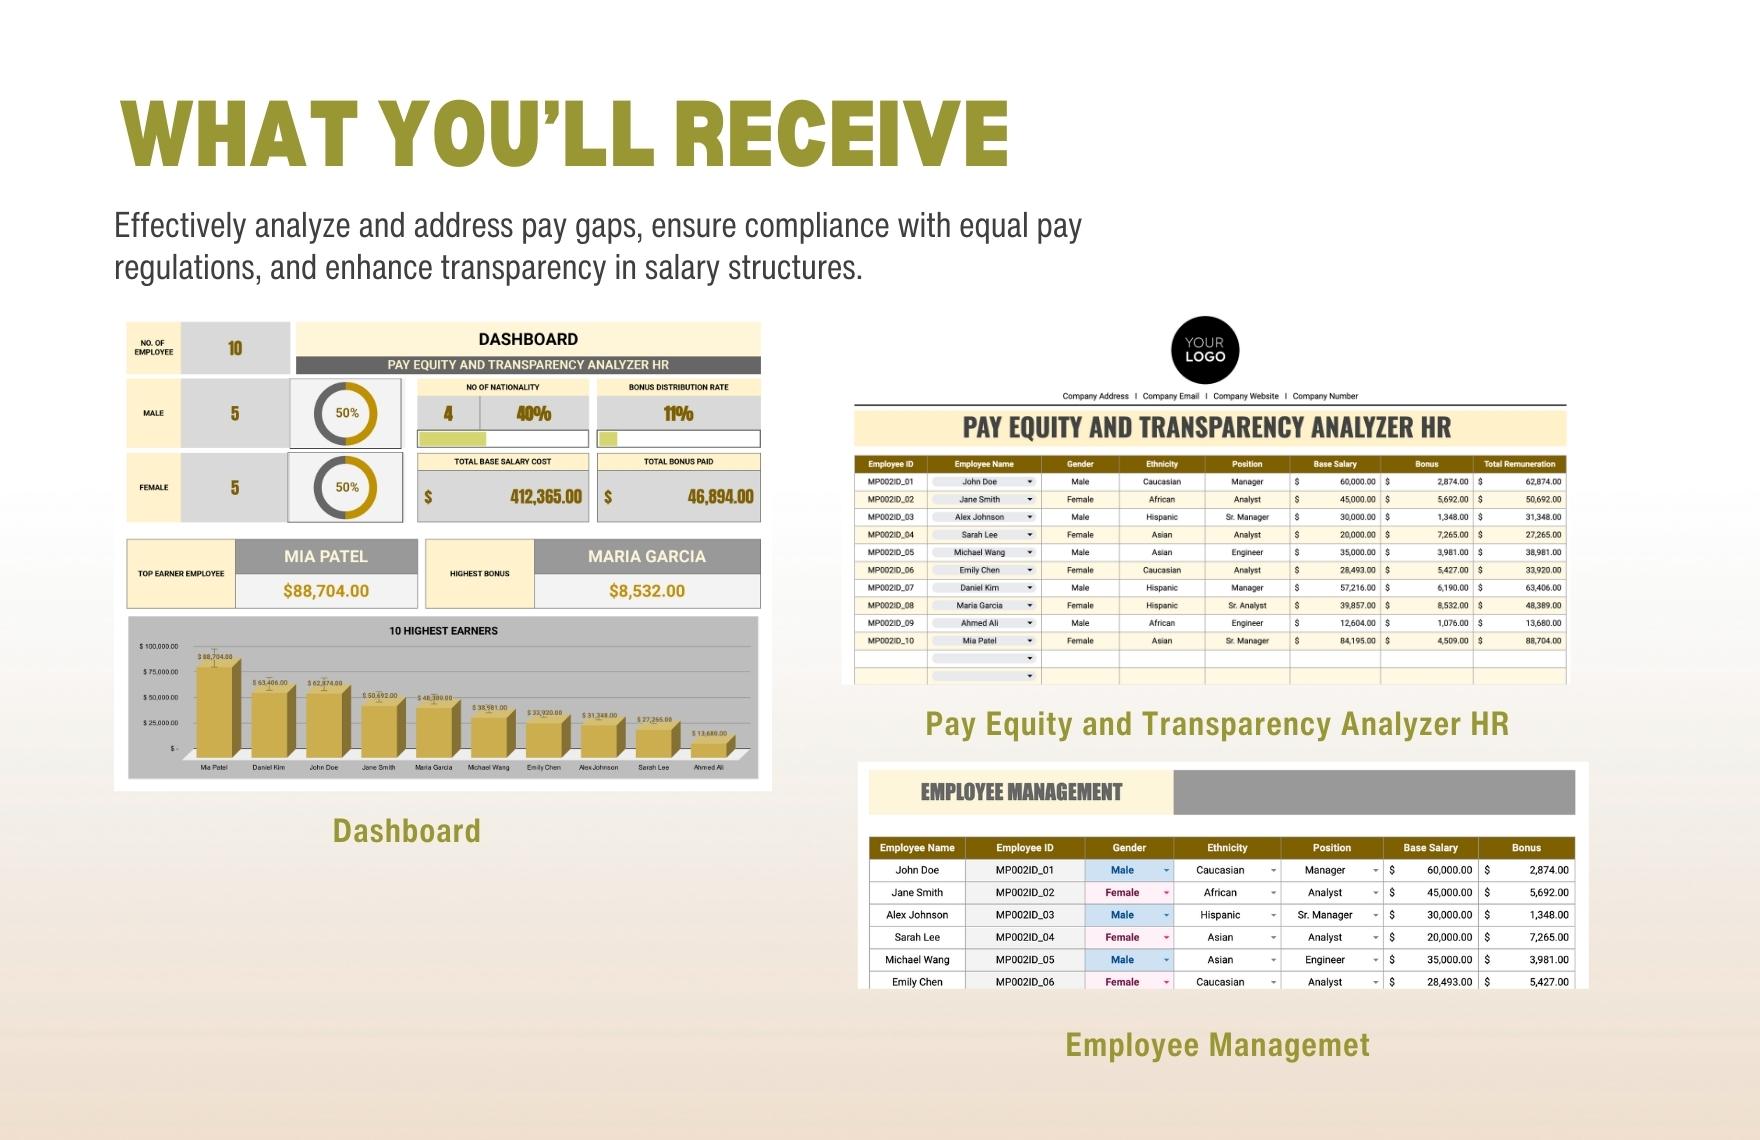 Pay Equity and Transparency Analyzer HR Template